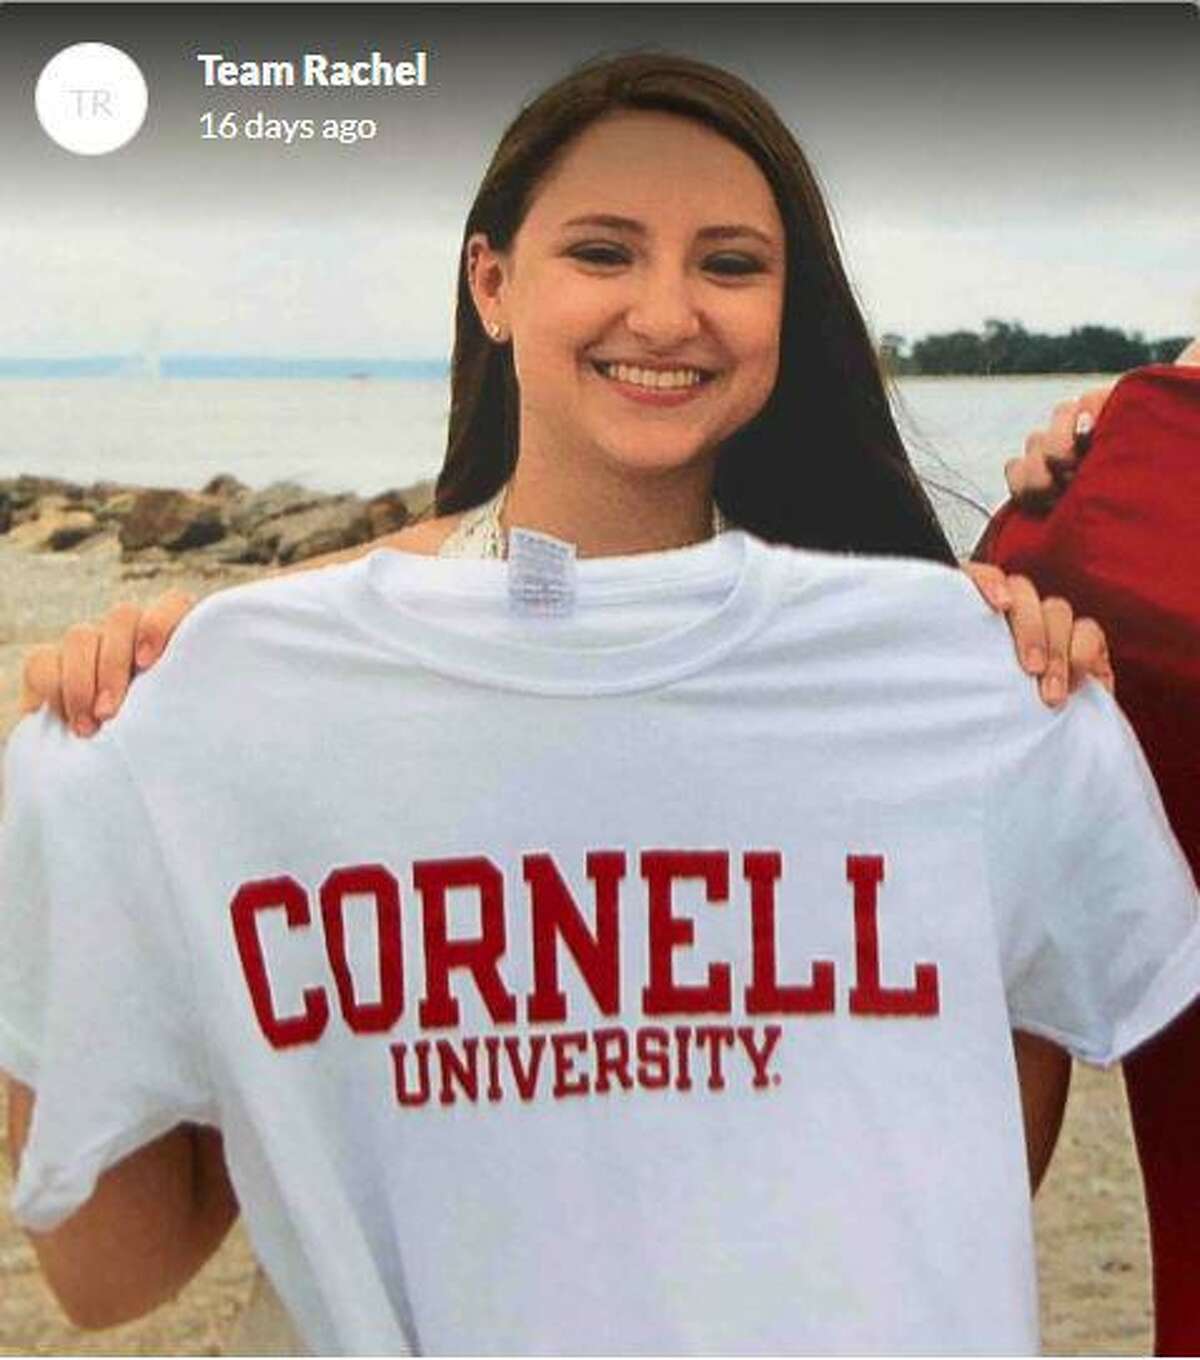 A photo of Westport resident Rachel Doran holding a t-shirt for Cornell University, where Doran was to begin her senior year, was posted on the gofundme page for Doran's recovery from Stevens Johnson Syndrome and Toxic Epidermal Necrolysis. Doran passed away over the weekend of Aug. 17.